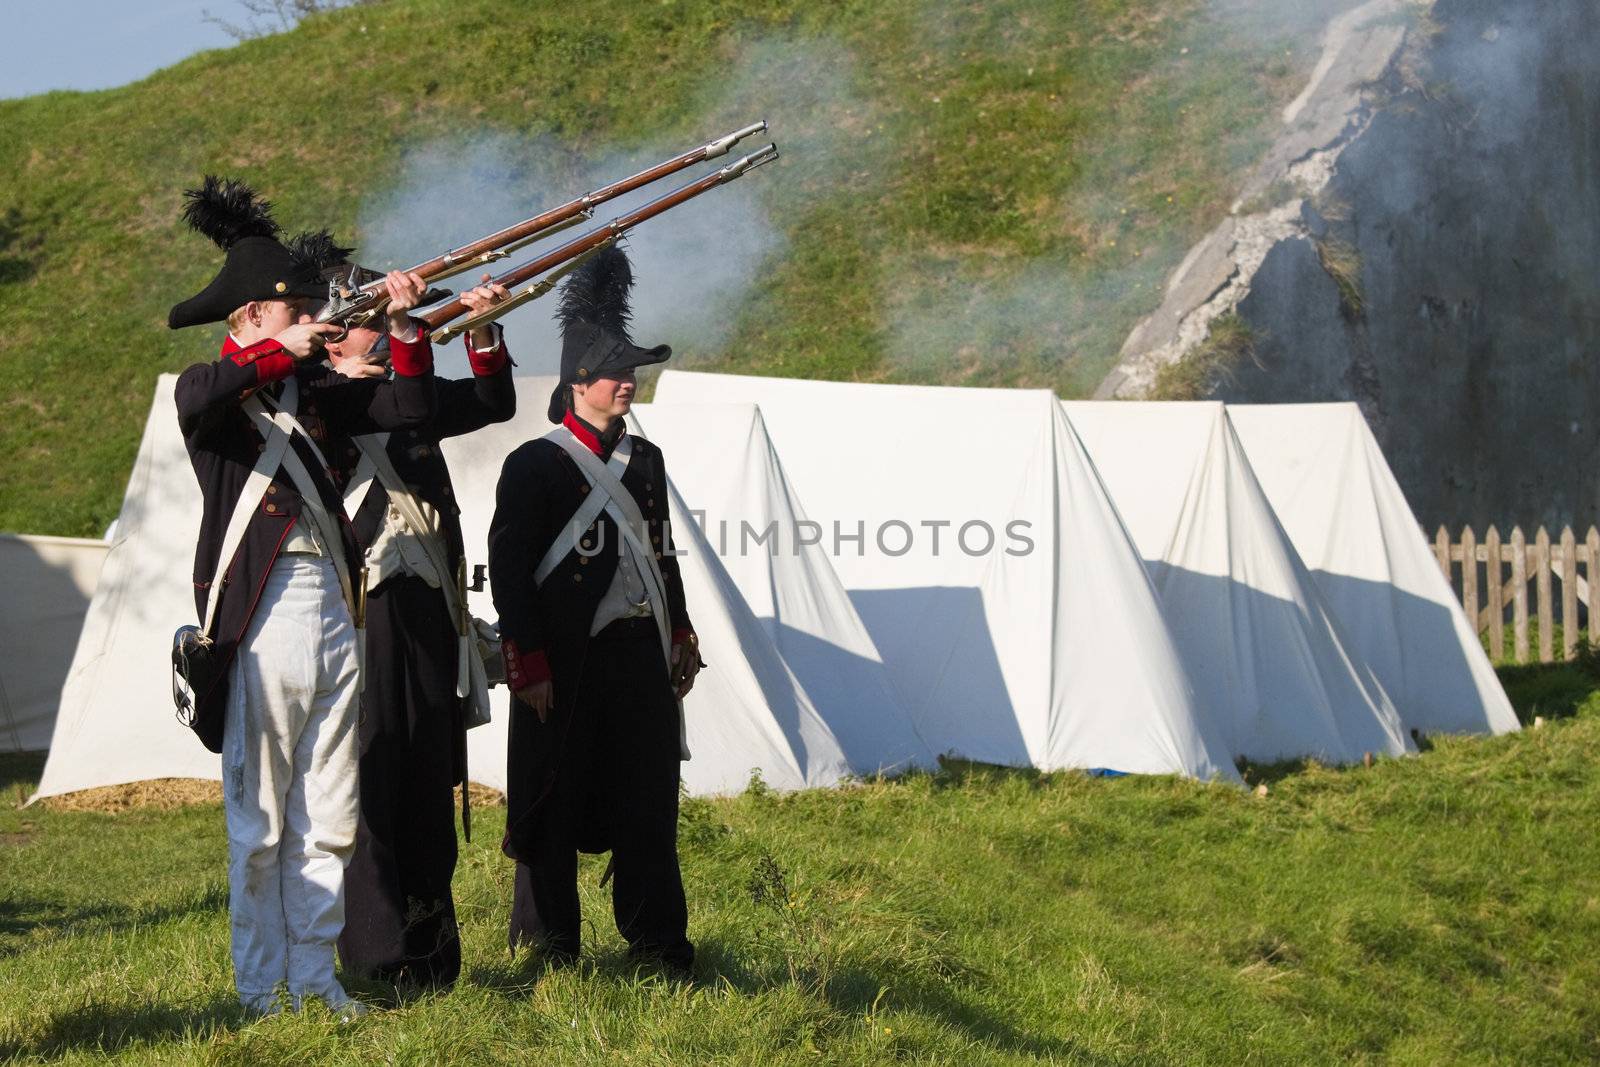 Re-enactment: Replay of Napoleonic period  by Colette